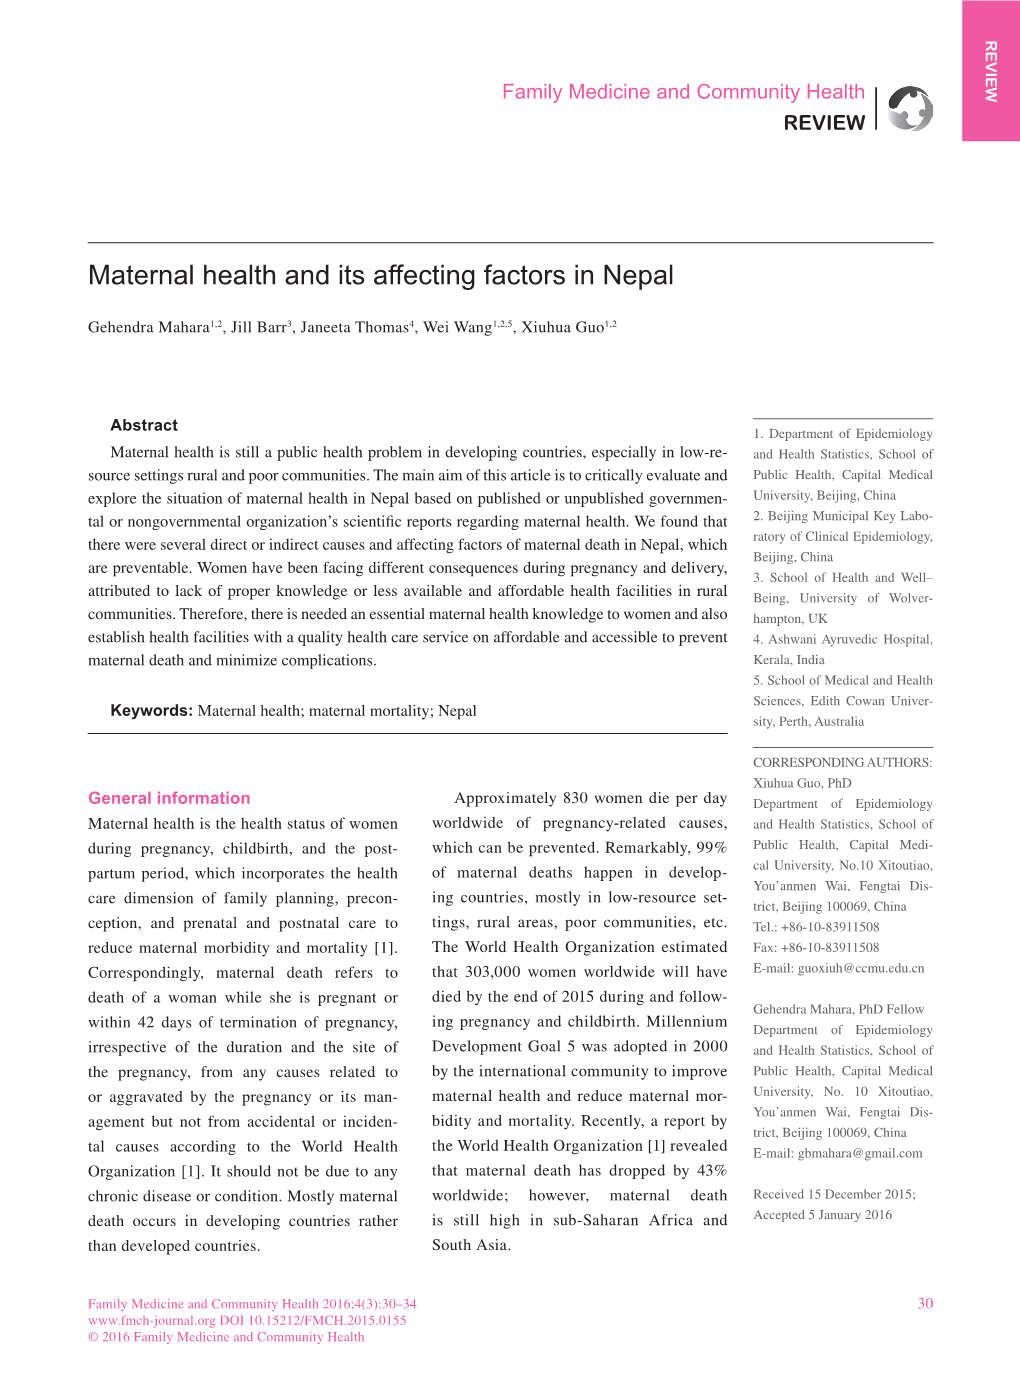 Maternal Health and Its Affecting Factors in Nepal